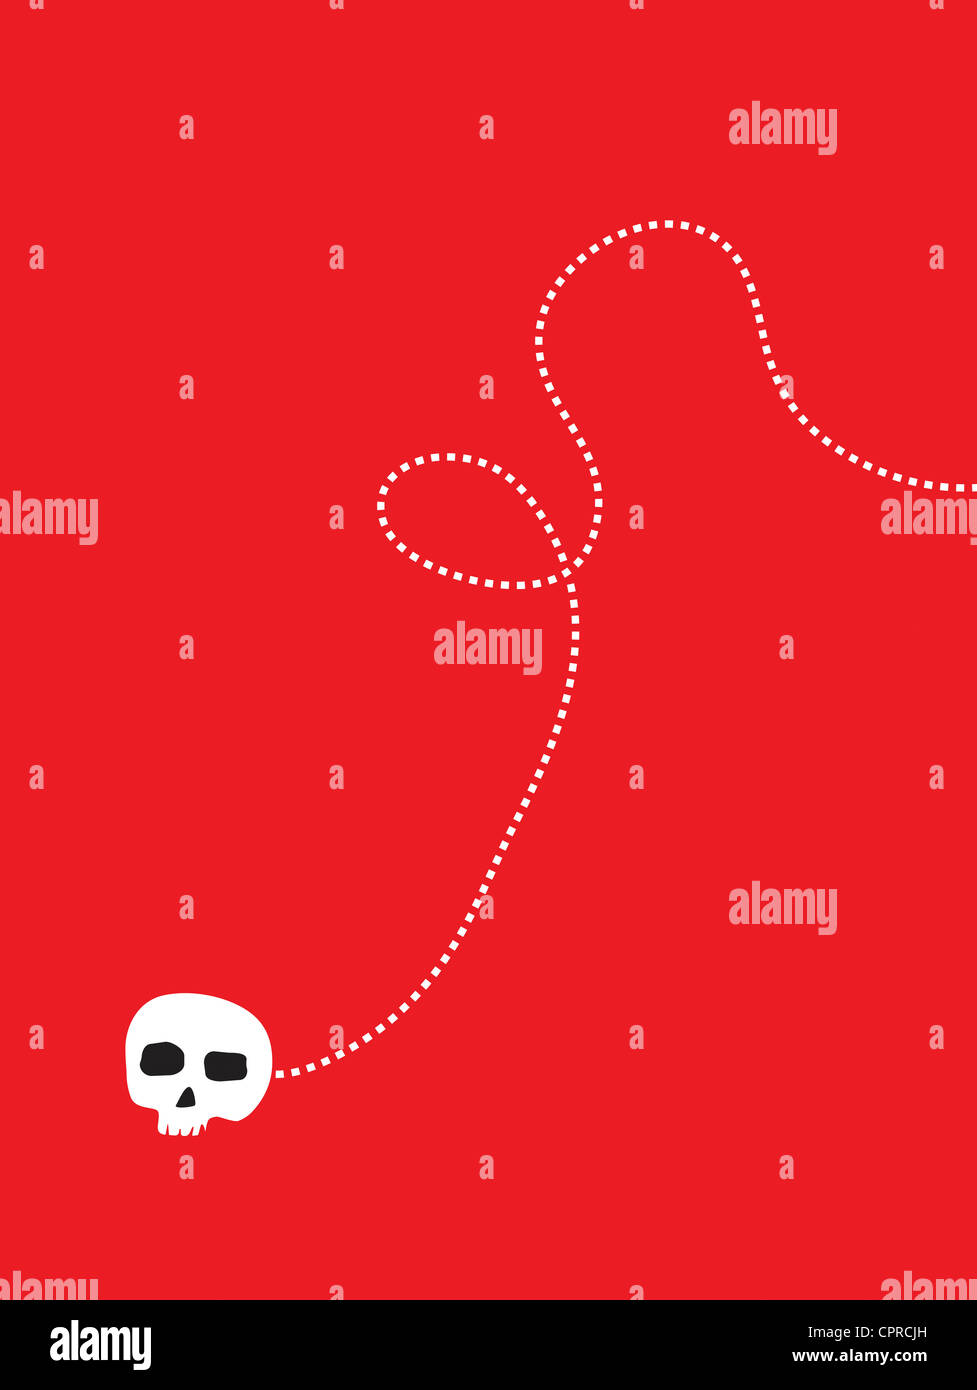 Skull and dotted line on red. Stock Photo